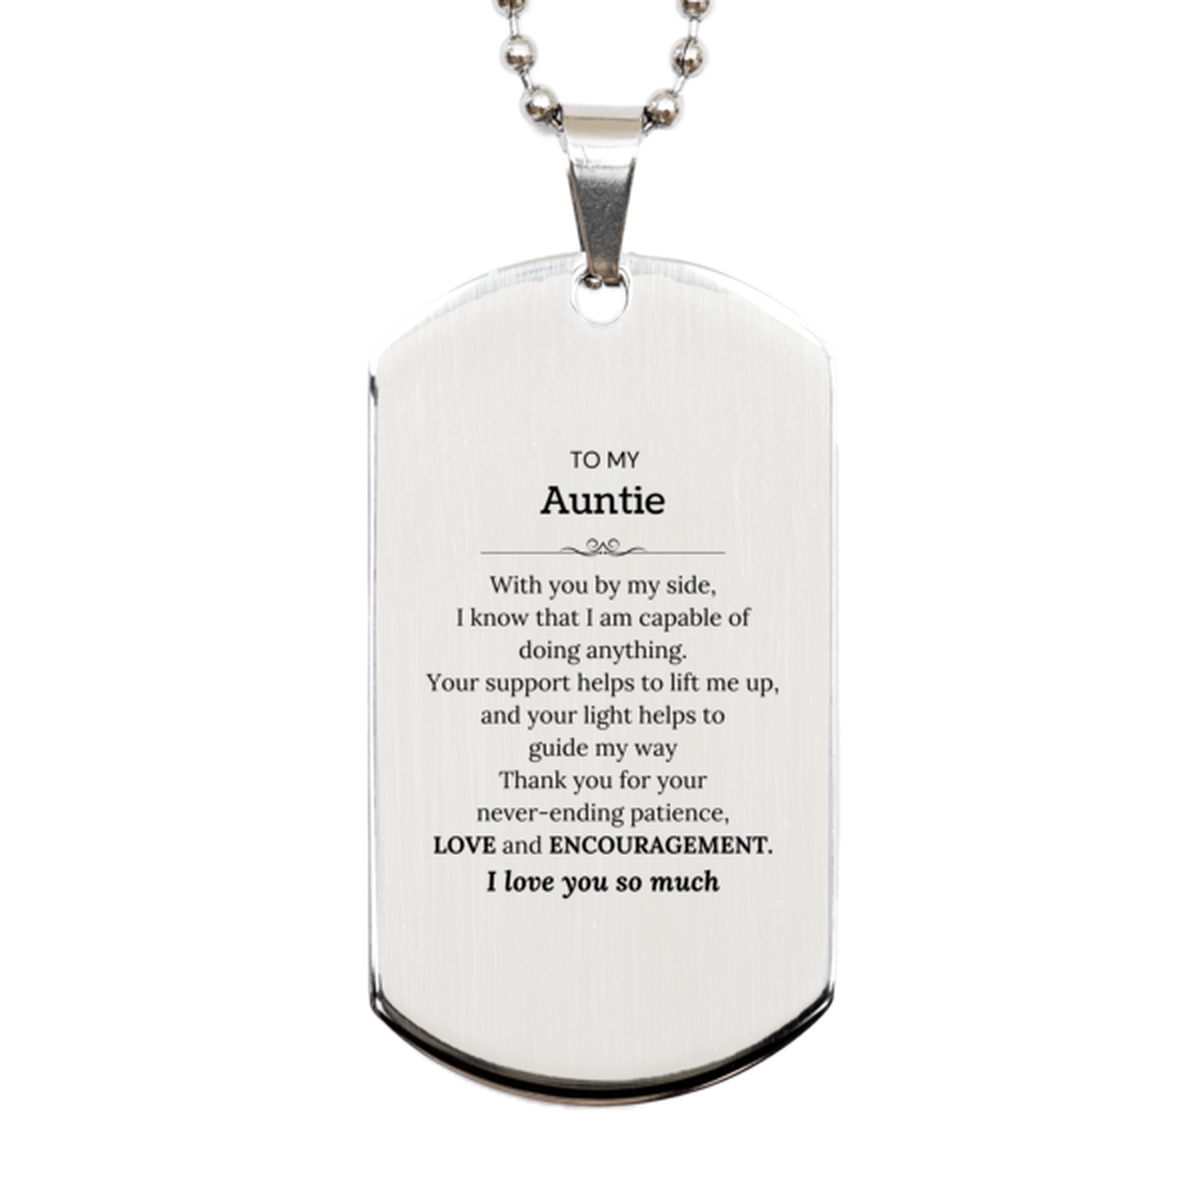 Appreciation Auntie Silver Dog Tag Gifts, To My Auntie Birthday Christmas Wedding Keepsake Gifts for Auntie With you by my side, I know that I am capable of doing anything. I love you so much